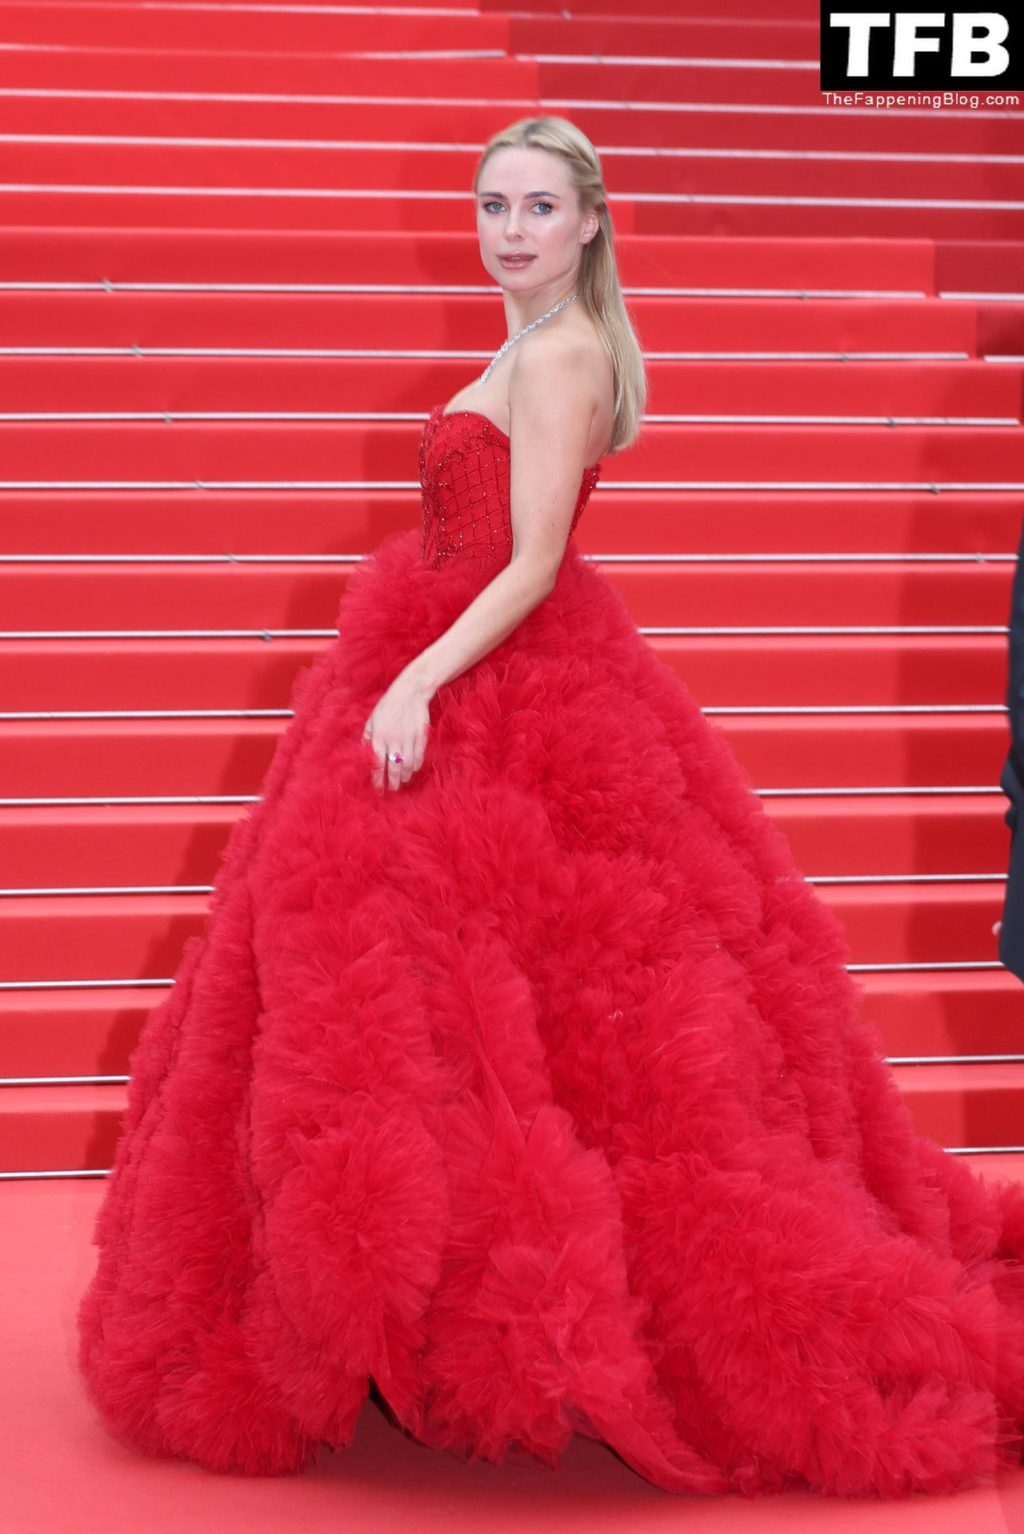 Kimberley Garner Sexy The Fappening Blog 129 1024x1534 - Kimberley Garner Looks Hot in a Red Dress at the 75th Annual Cannes Film Festival (134 Photos)